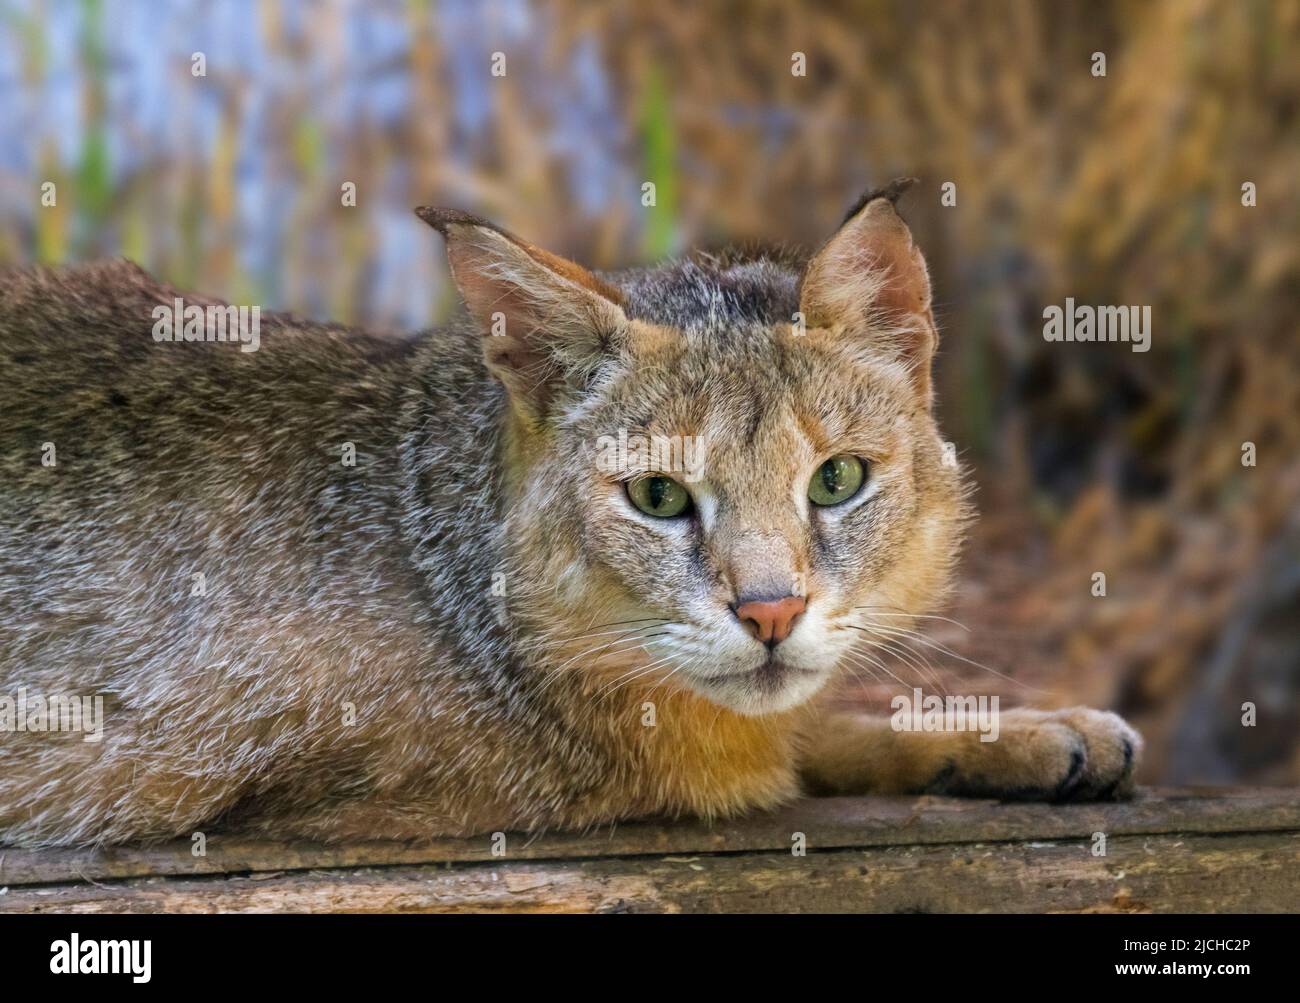 Jungle cat / reed cat / swamp cat (Felis chaus / Felis catolynx) in wetland, native to the Middle East, the Caucasus, South Asia and southern China Stock Photo